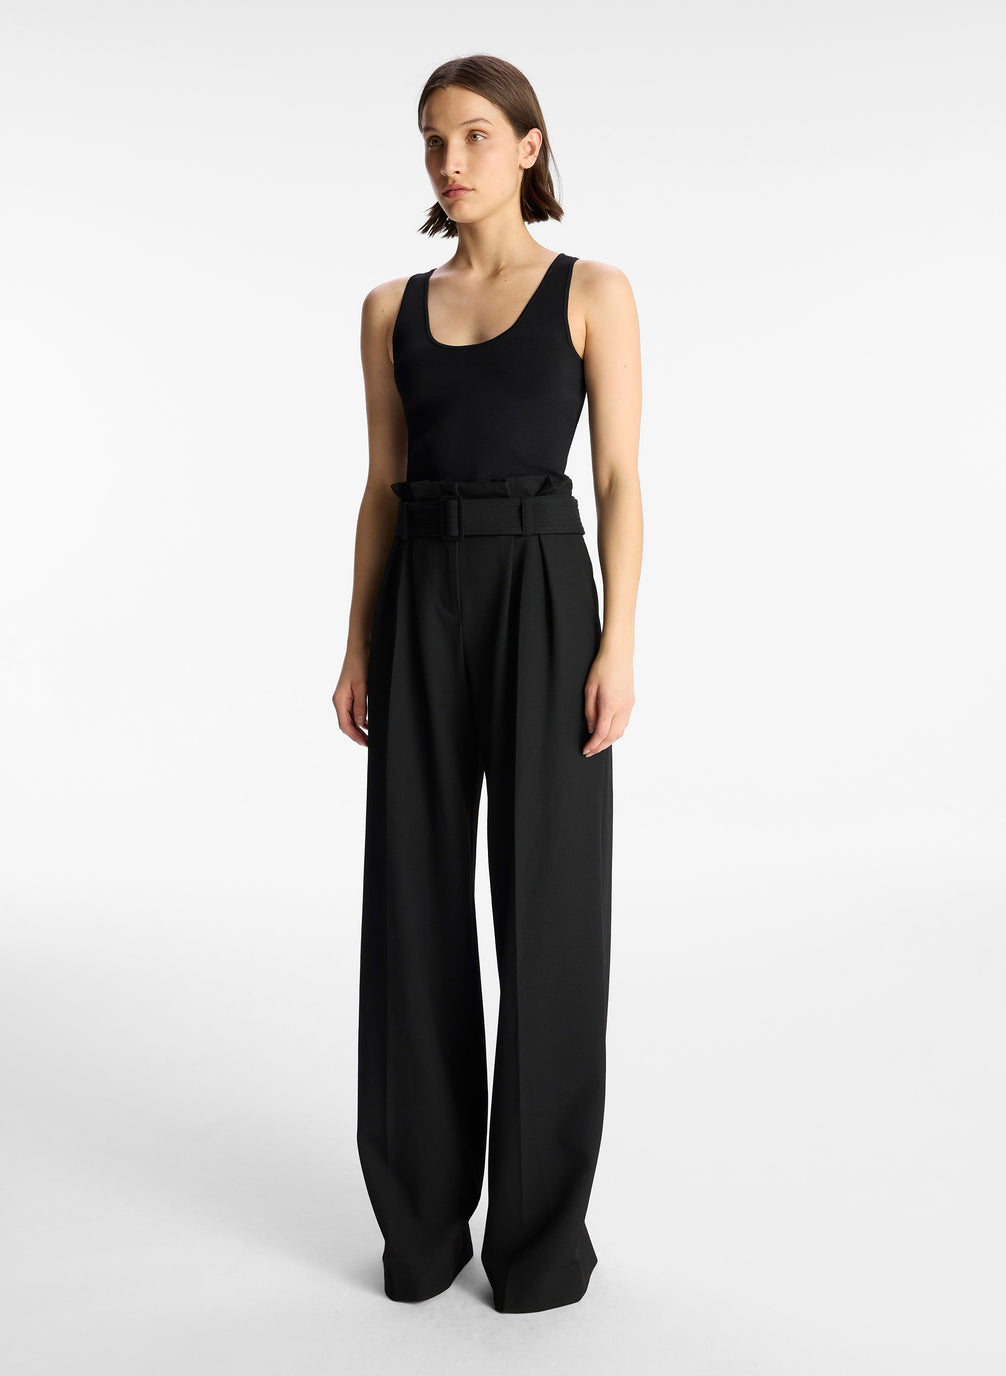 side view of woman wearing black tank top and black wide leg pants